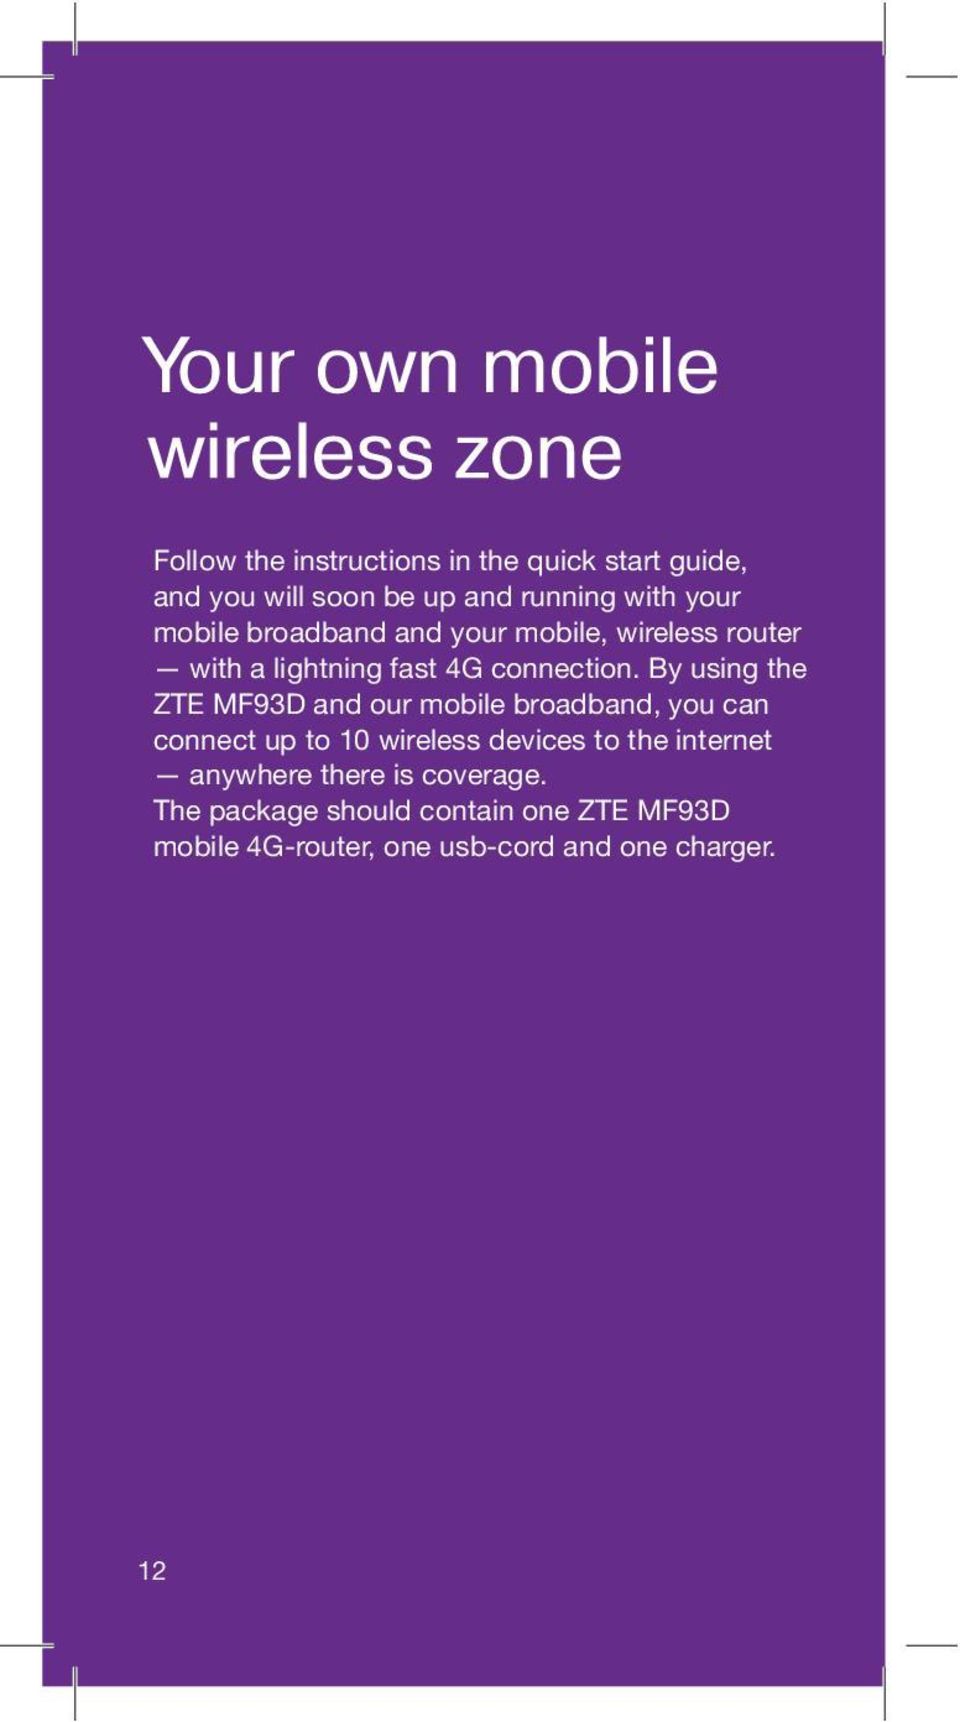 By using the ZTE MF93D and our mobile broadband, you can connect up to 10 wireless devices to the